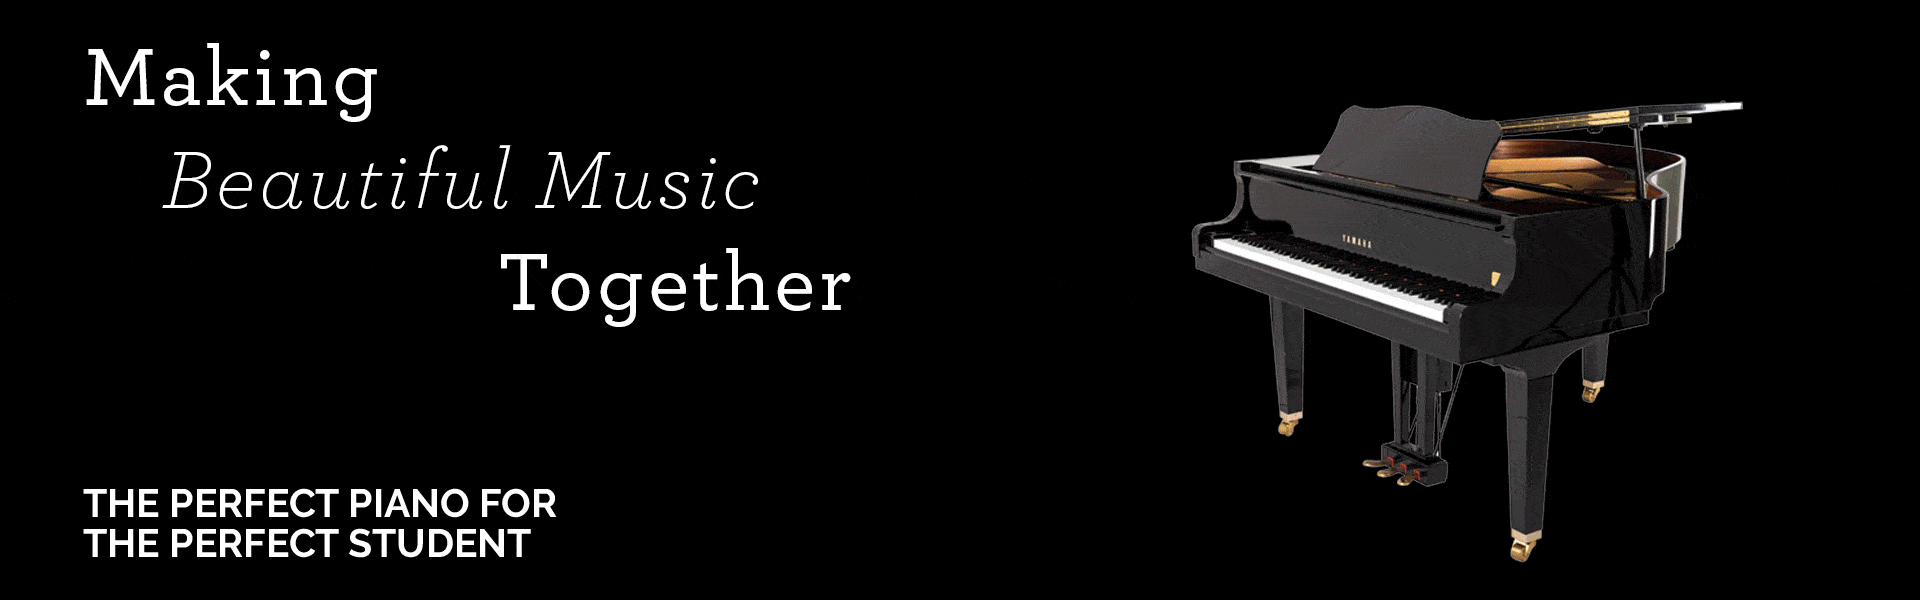 Making beautiful Music together next to a rotating picture of pianos